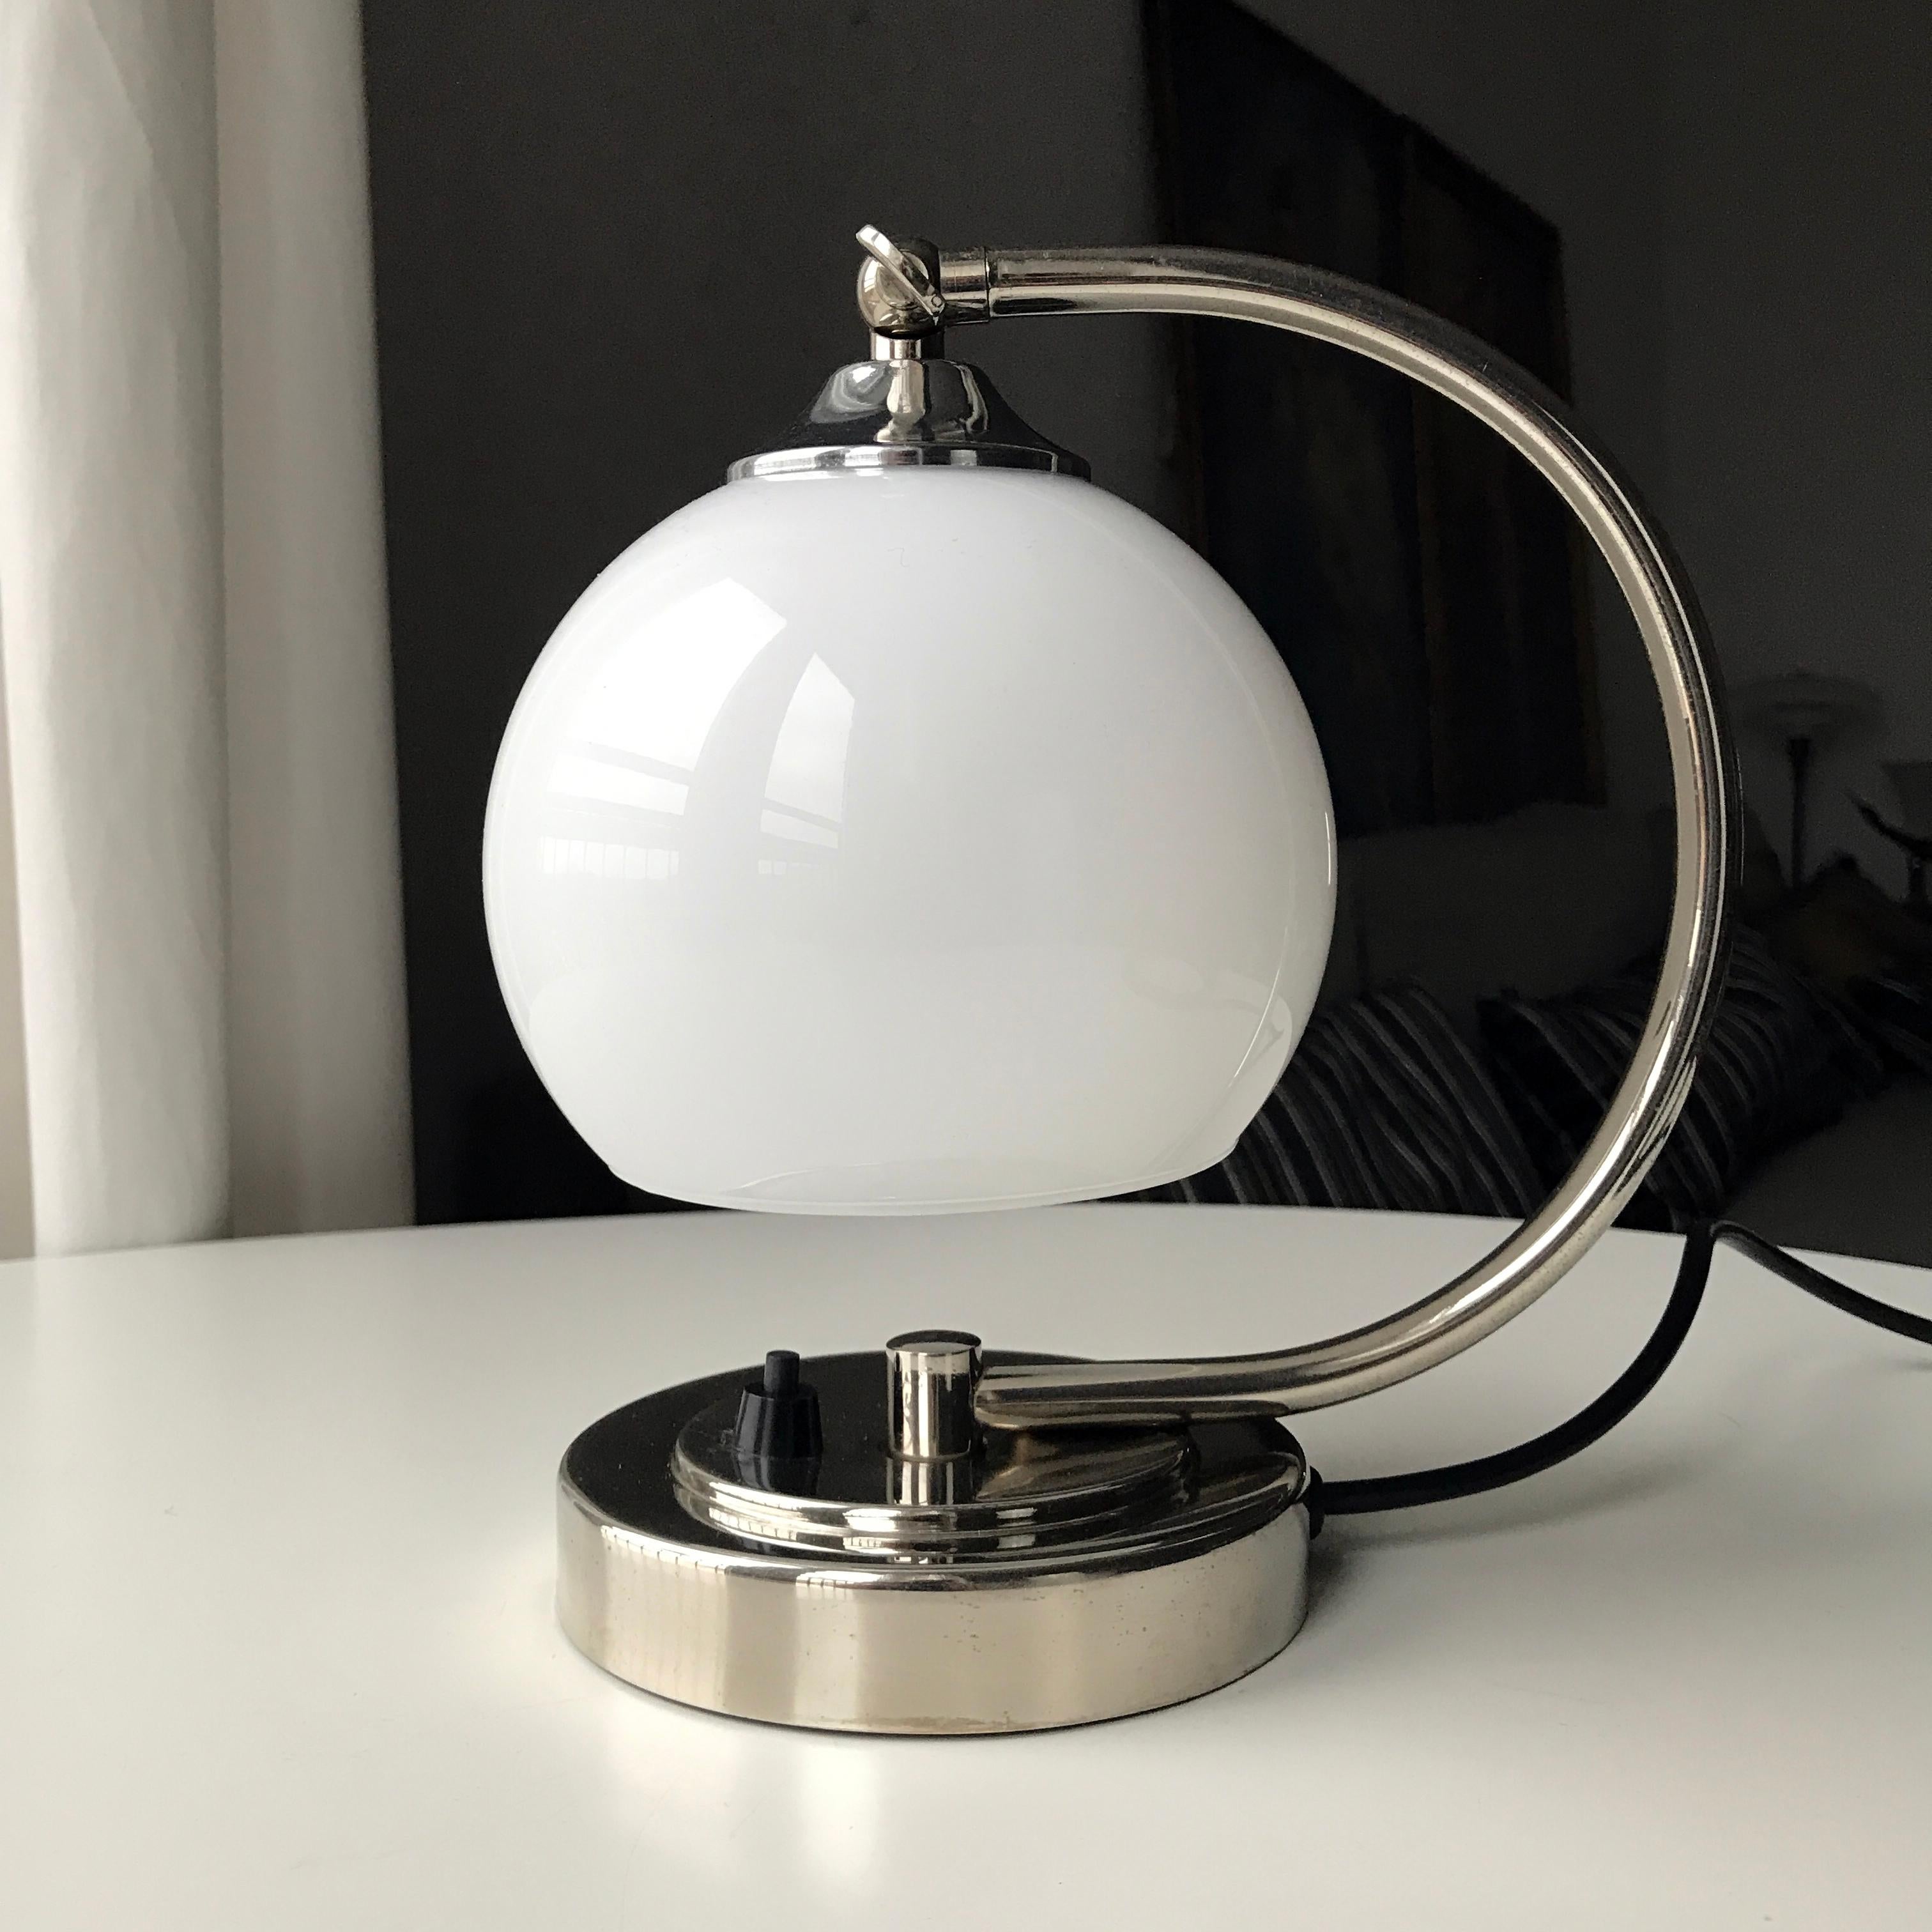 Art Deco Fog and Mørup Table Lamp with base in chrome metal and white opaline glass shade. Manufactured by Danish company Fog and Mørup in the period of 1920s-1950s. Angle of the glass holder can be adjusted within 90 degrees and locked in position.